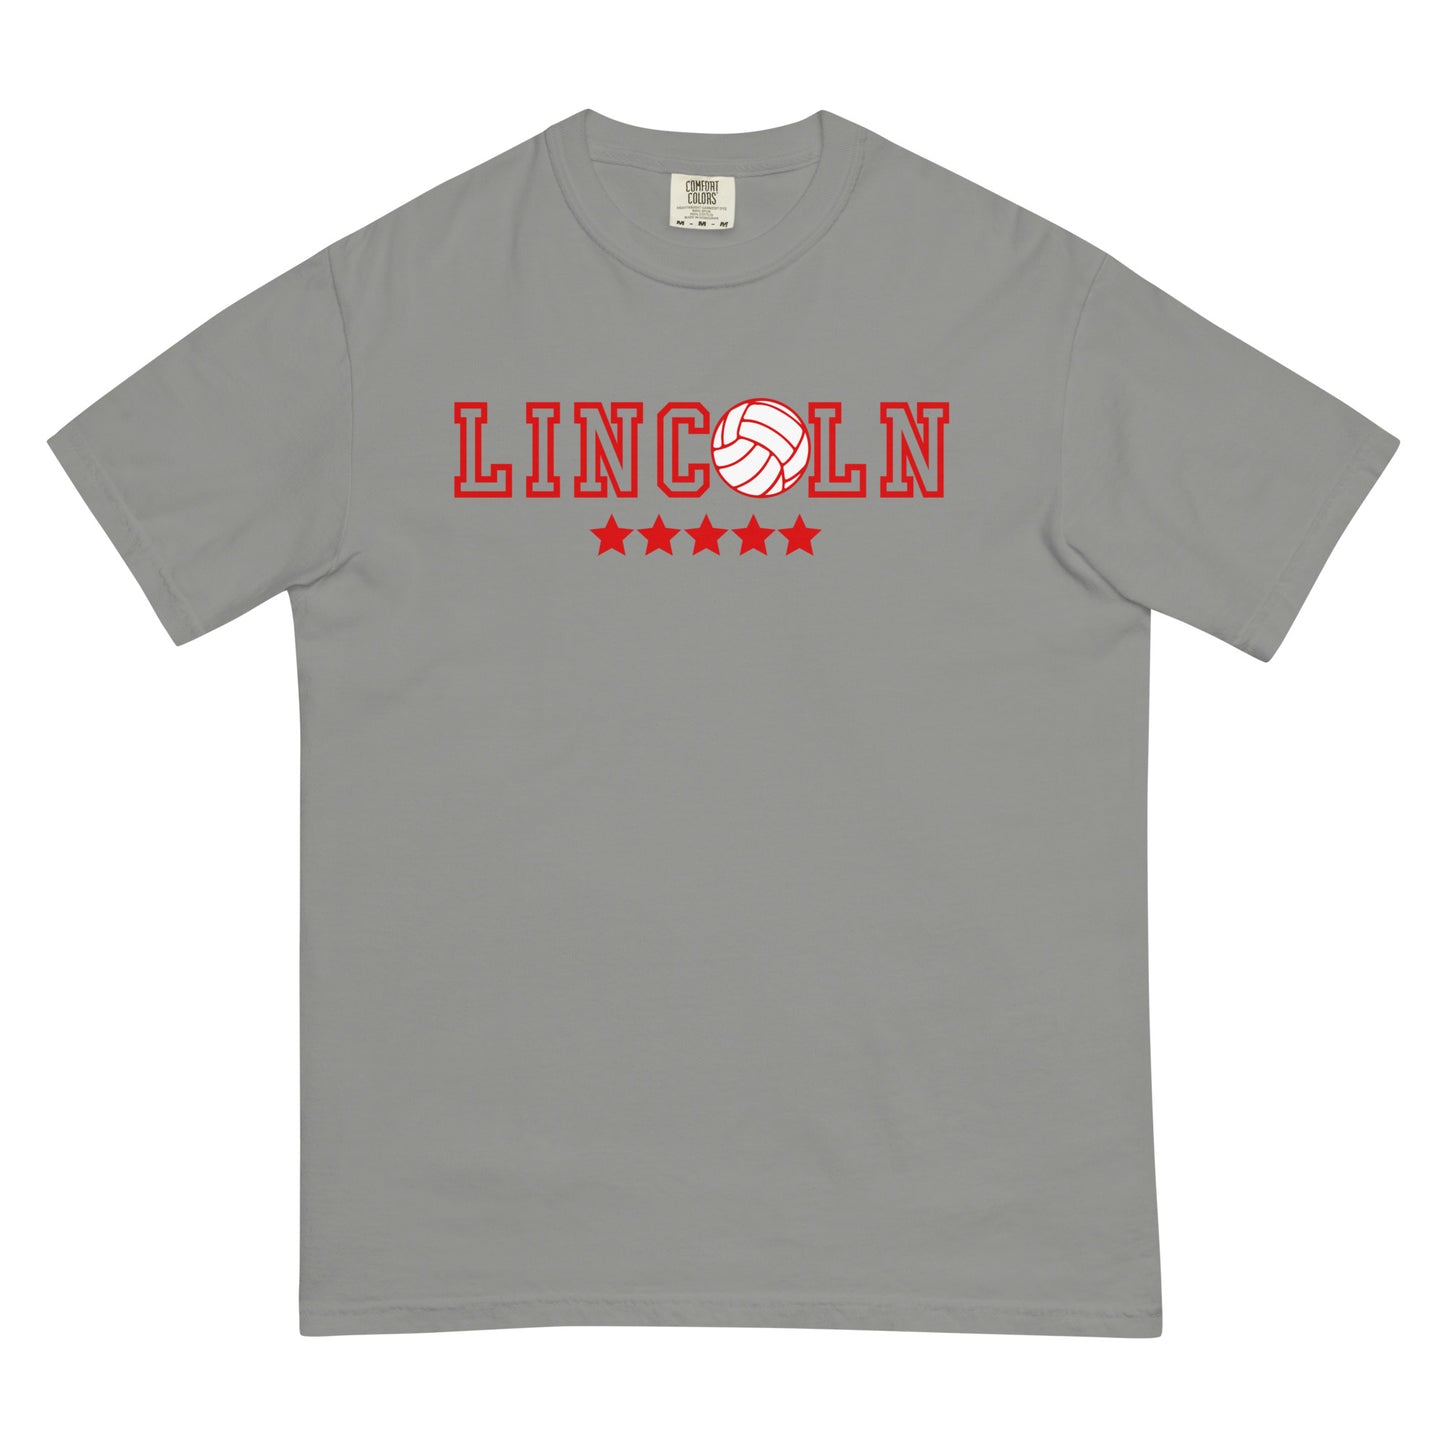 Lincoln Volleyball T-shirt